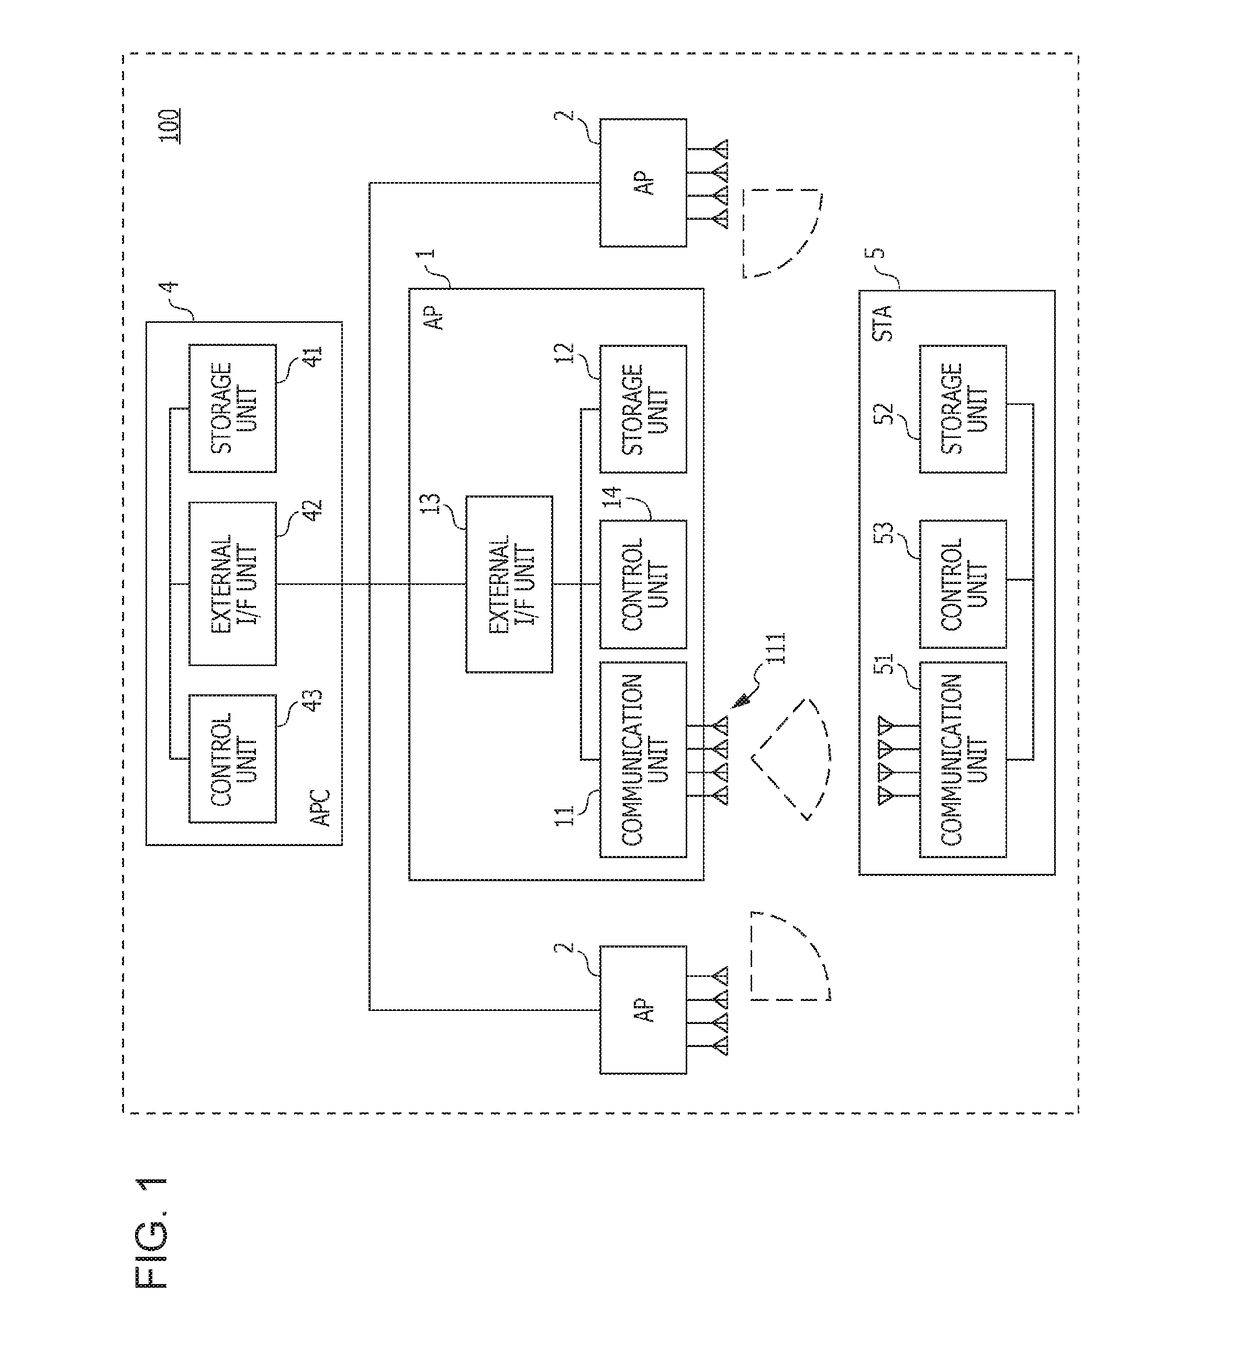 Location estimation system, location estimation method, and base station control device